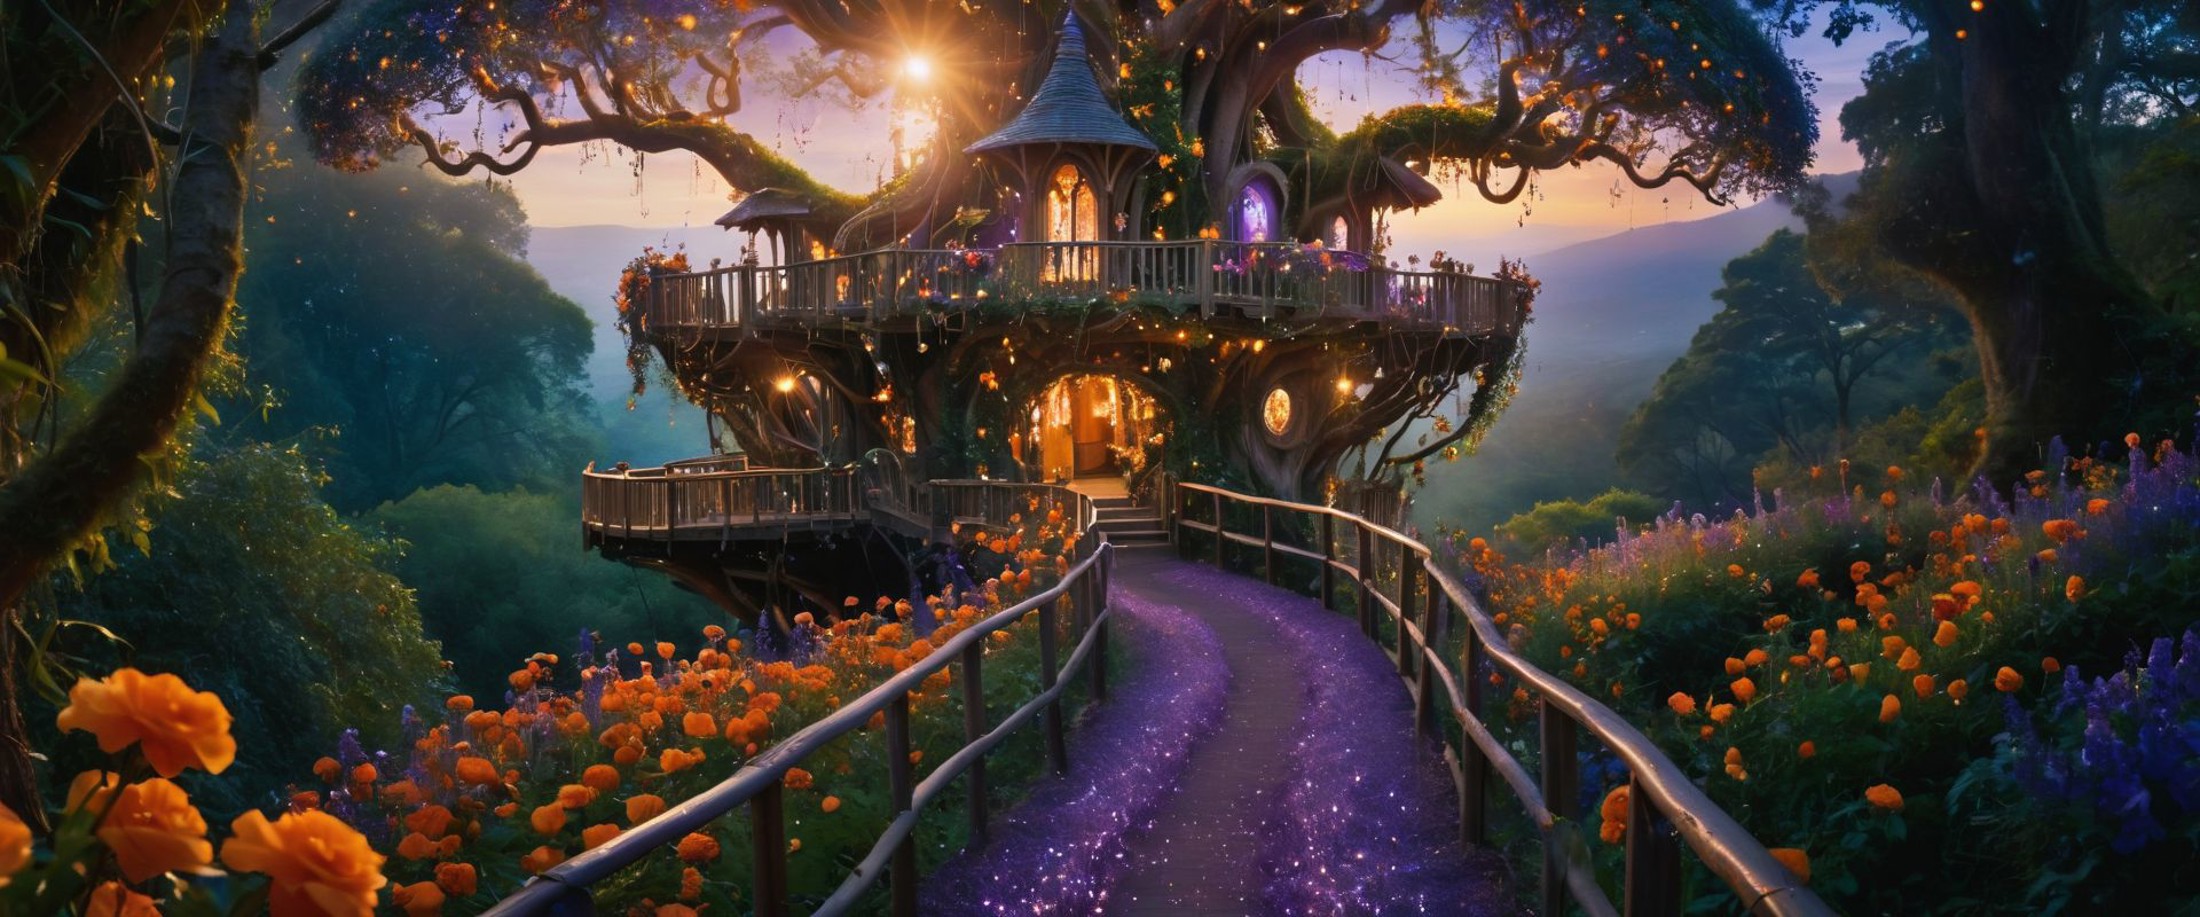 movie still, cinematic, beautiful, The winding pathway in 'Enchanted Garden', surrounded by a riot of sunset orange hypnot...